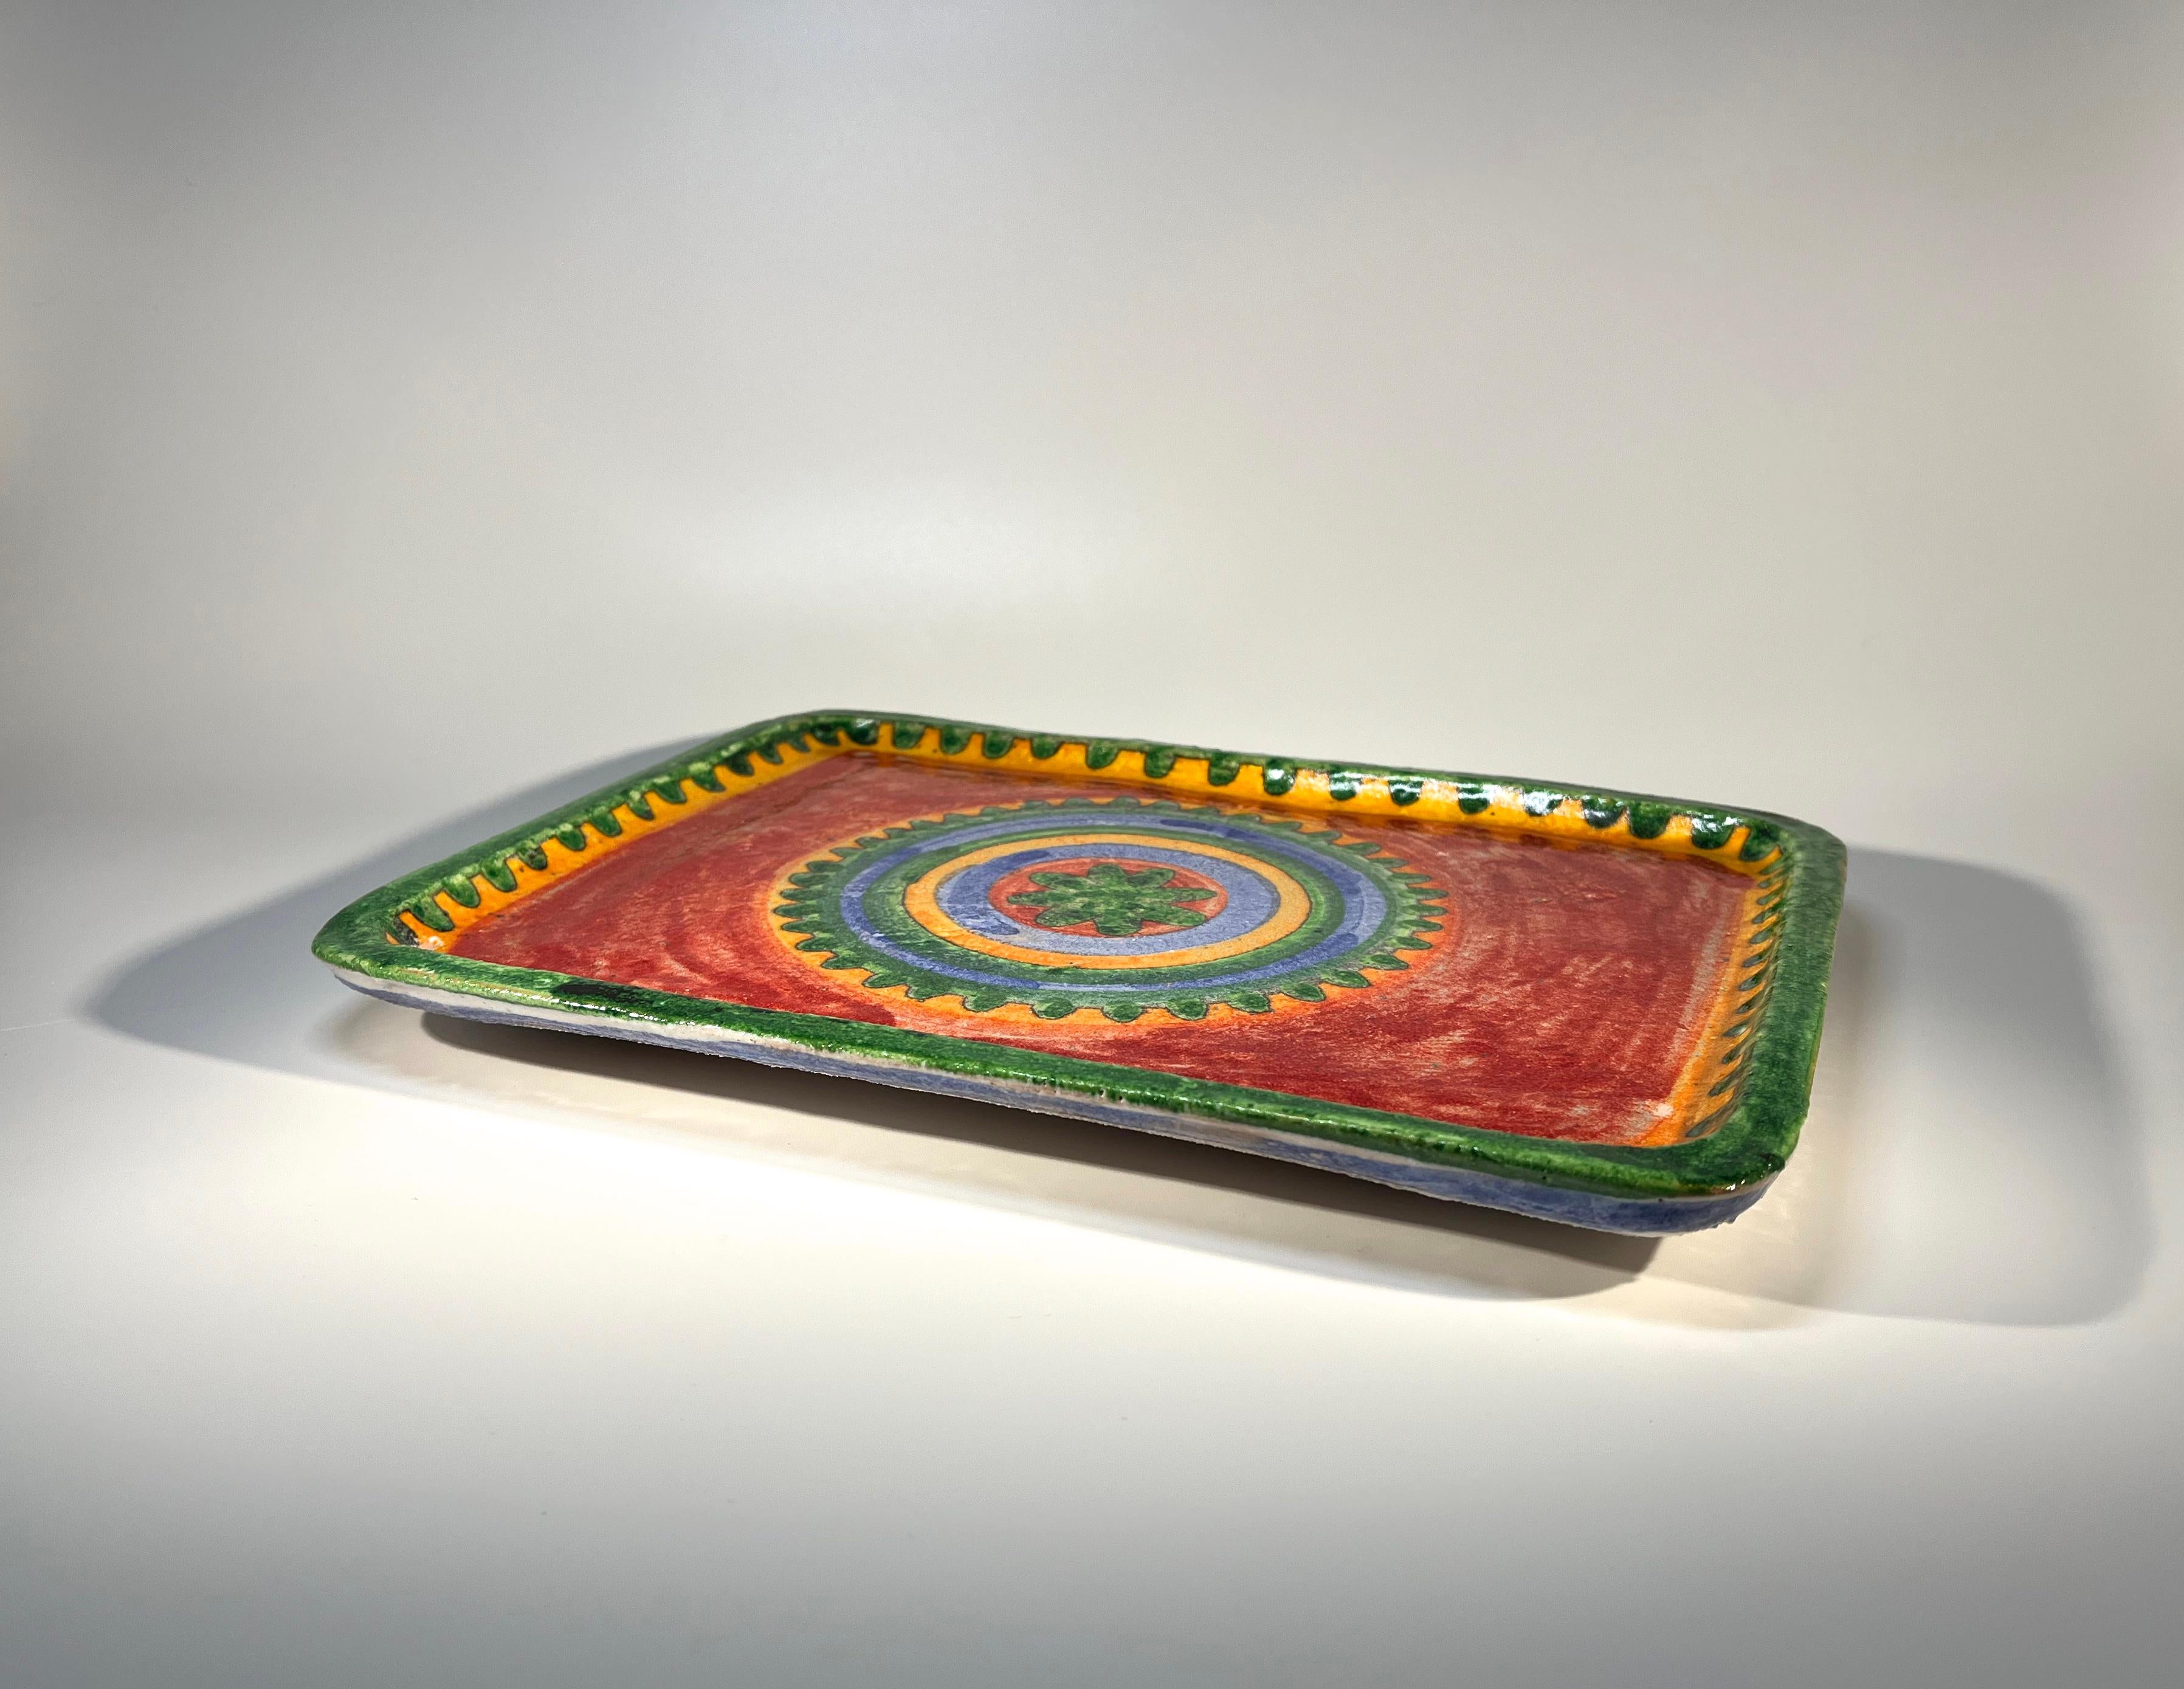 Colours Of The Mediterranean, Glazed Ceramic Platter By DeSimone, Italy, c1960 In Good Condition For Sale In Rothley, Leicestershire